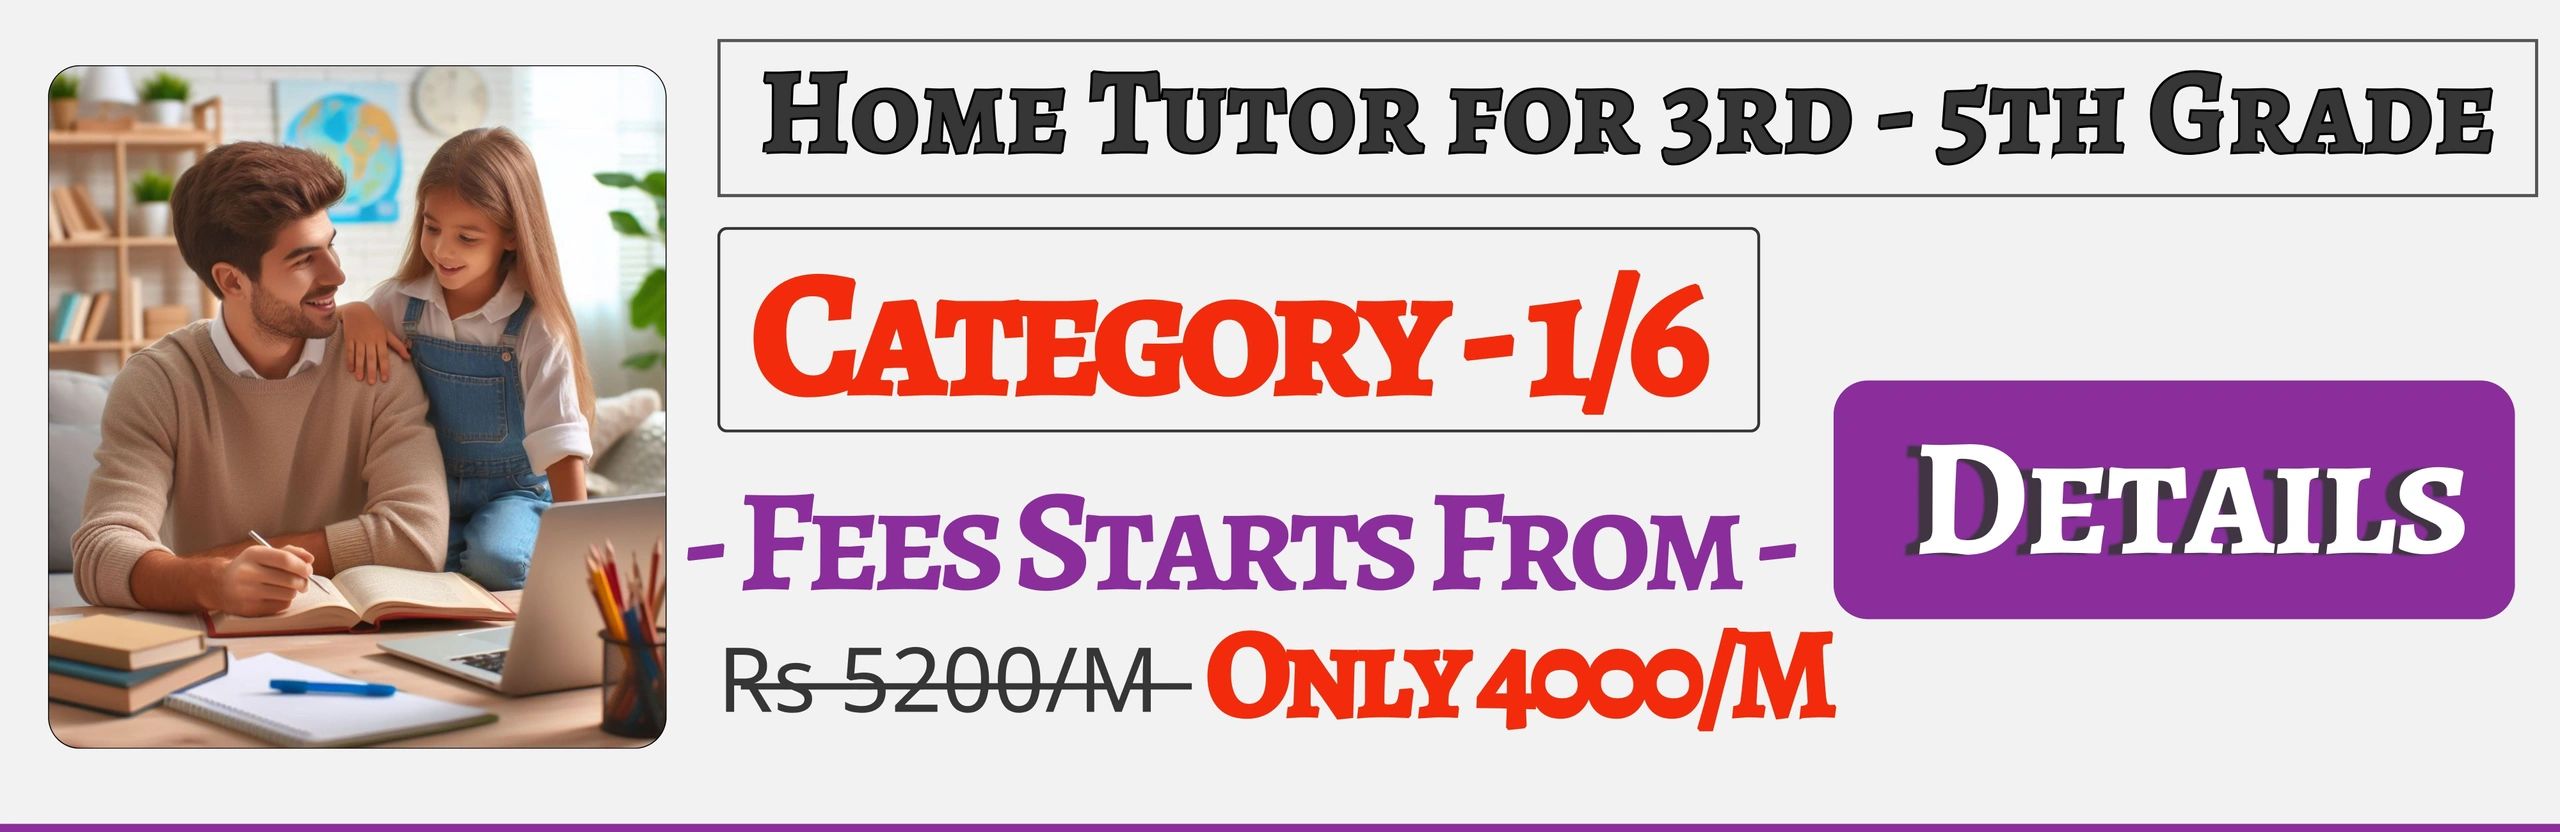 Book Best Home Tuition Tutors For 3rd , 4th & 5th In Jaipur , Fees Only 4000/M